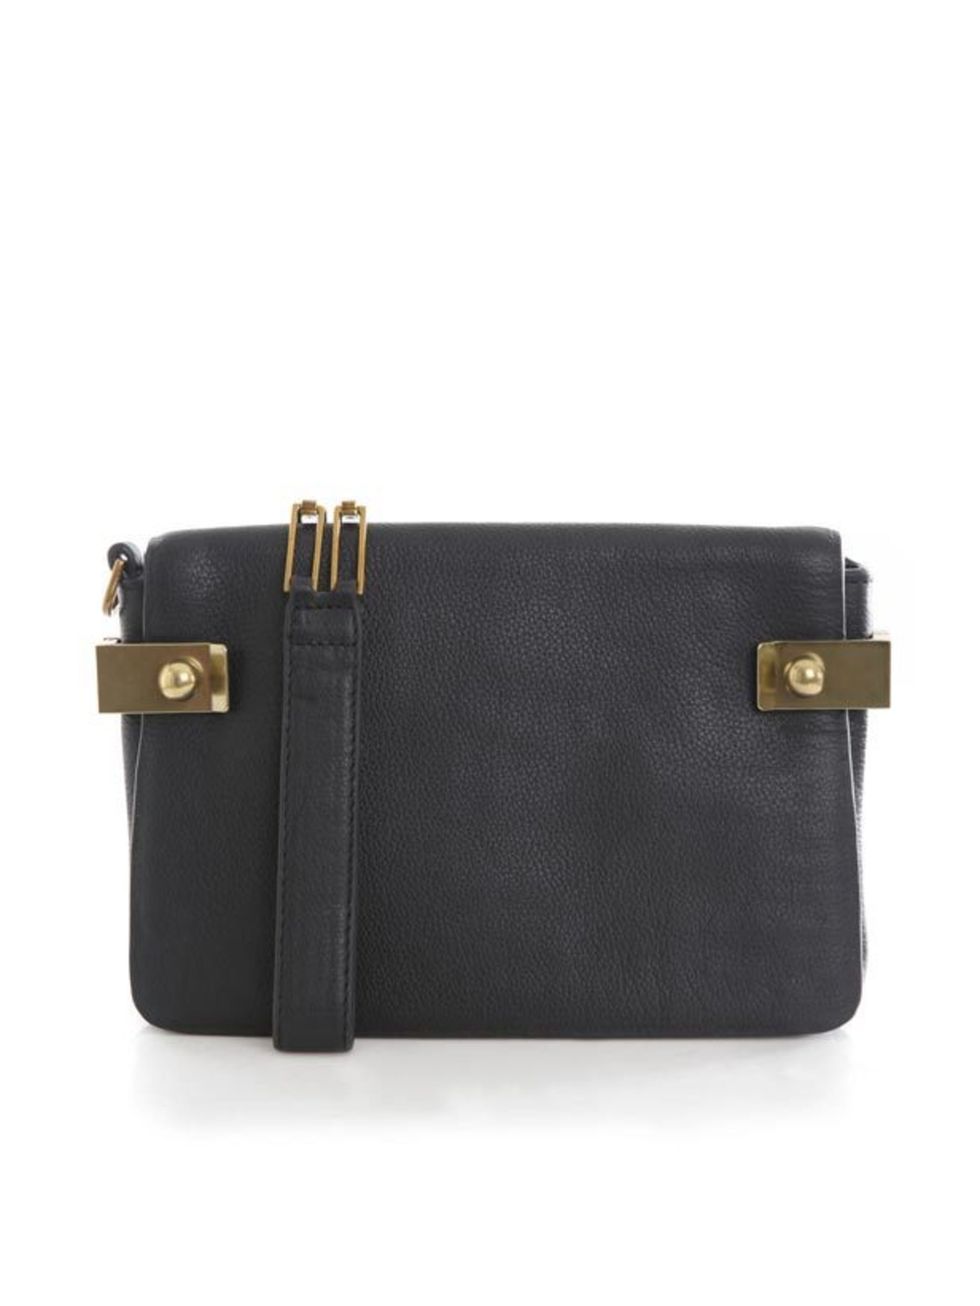 <p>Raoul leather clutch, £168, at <a href="http://www.matchesfashion.com/fcp/product/Matches-Fashion//raoul-RAO-Y-LRBG384-bags-BLACK/42642">Matches</a></p>